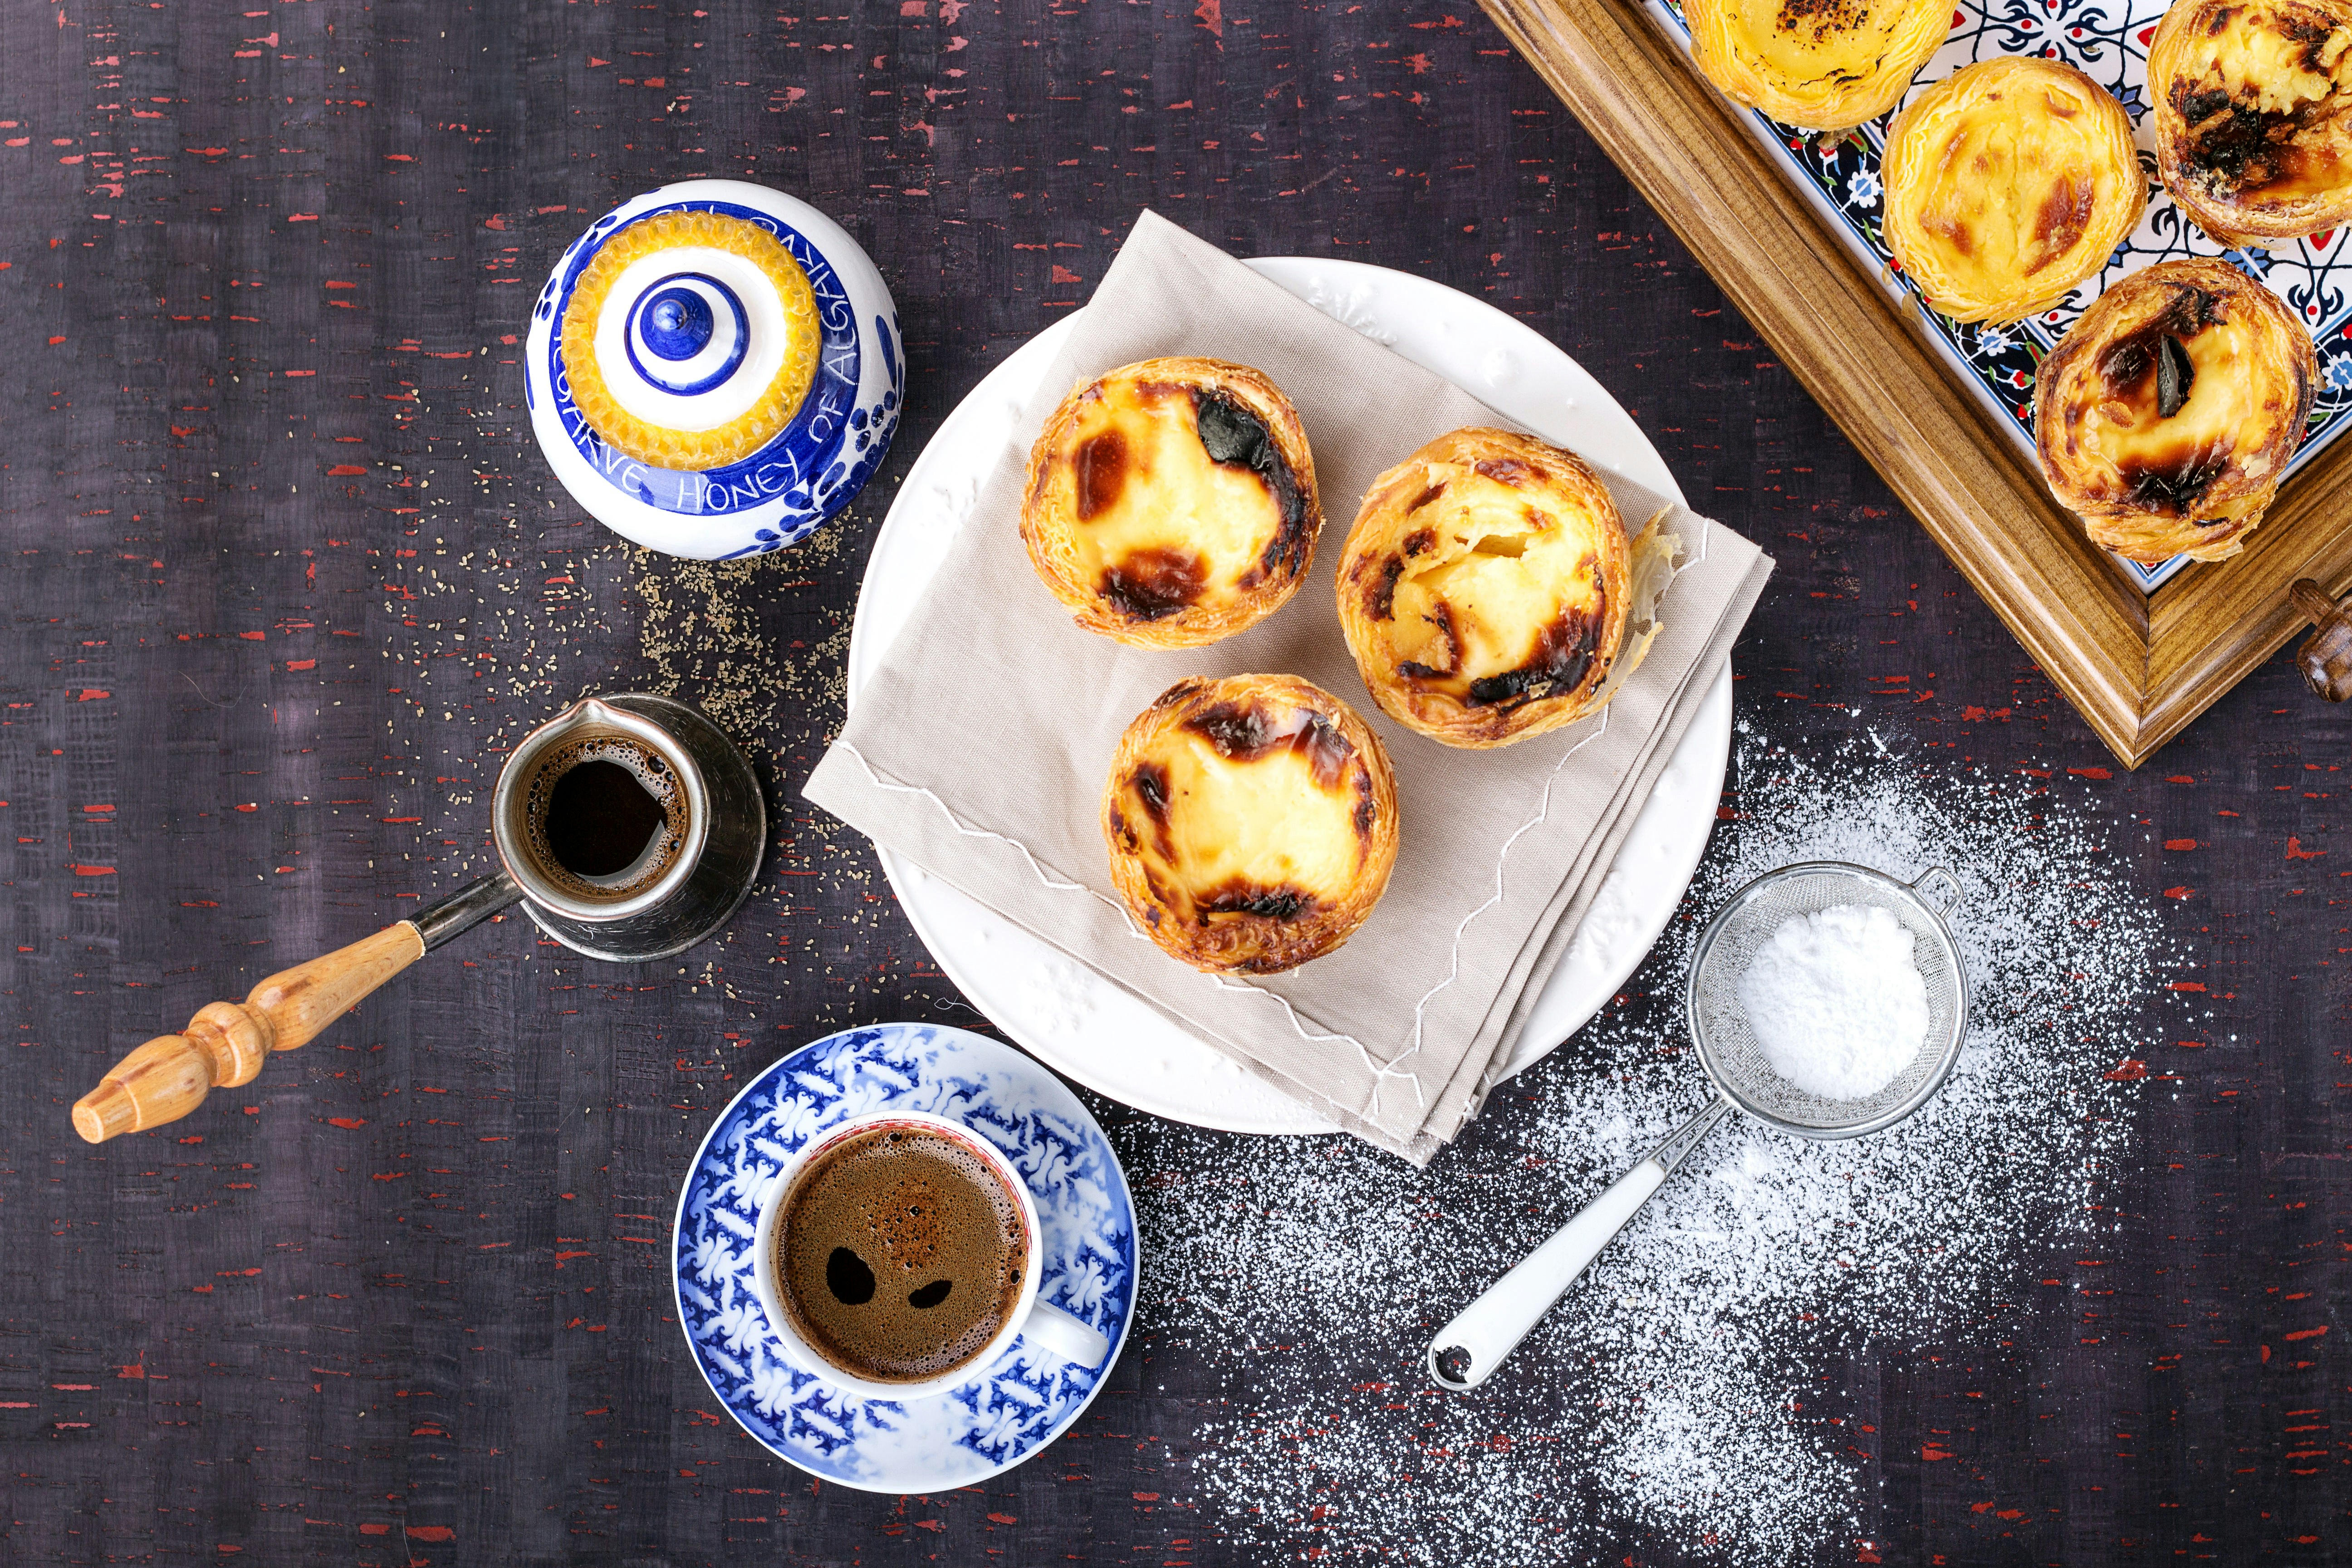 Traditional Portugese pastry Pastel de Nata served with coffee and honey on a tray over a rustic wooden board. There is also a sieve with icing sugar next to the pastries on the board.